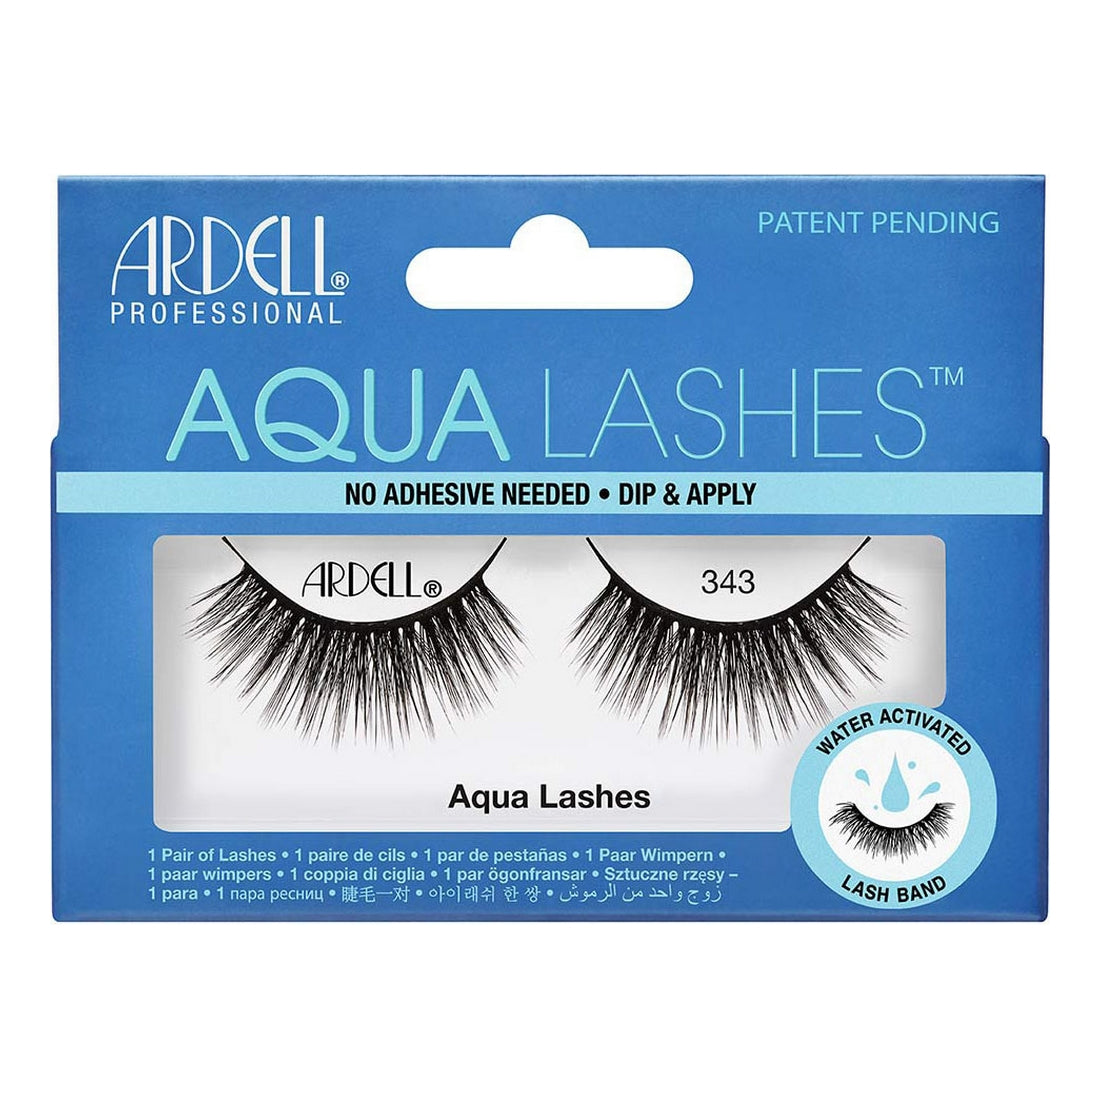 Valse Wimpers Aqua Lashes Ardell 63404 Nº 343